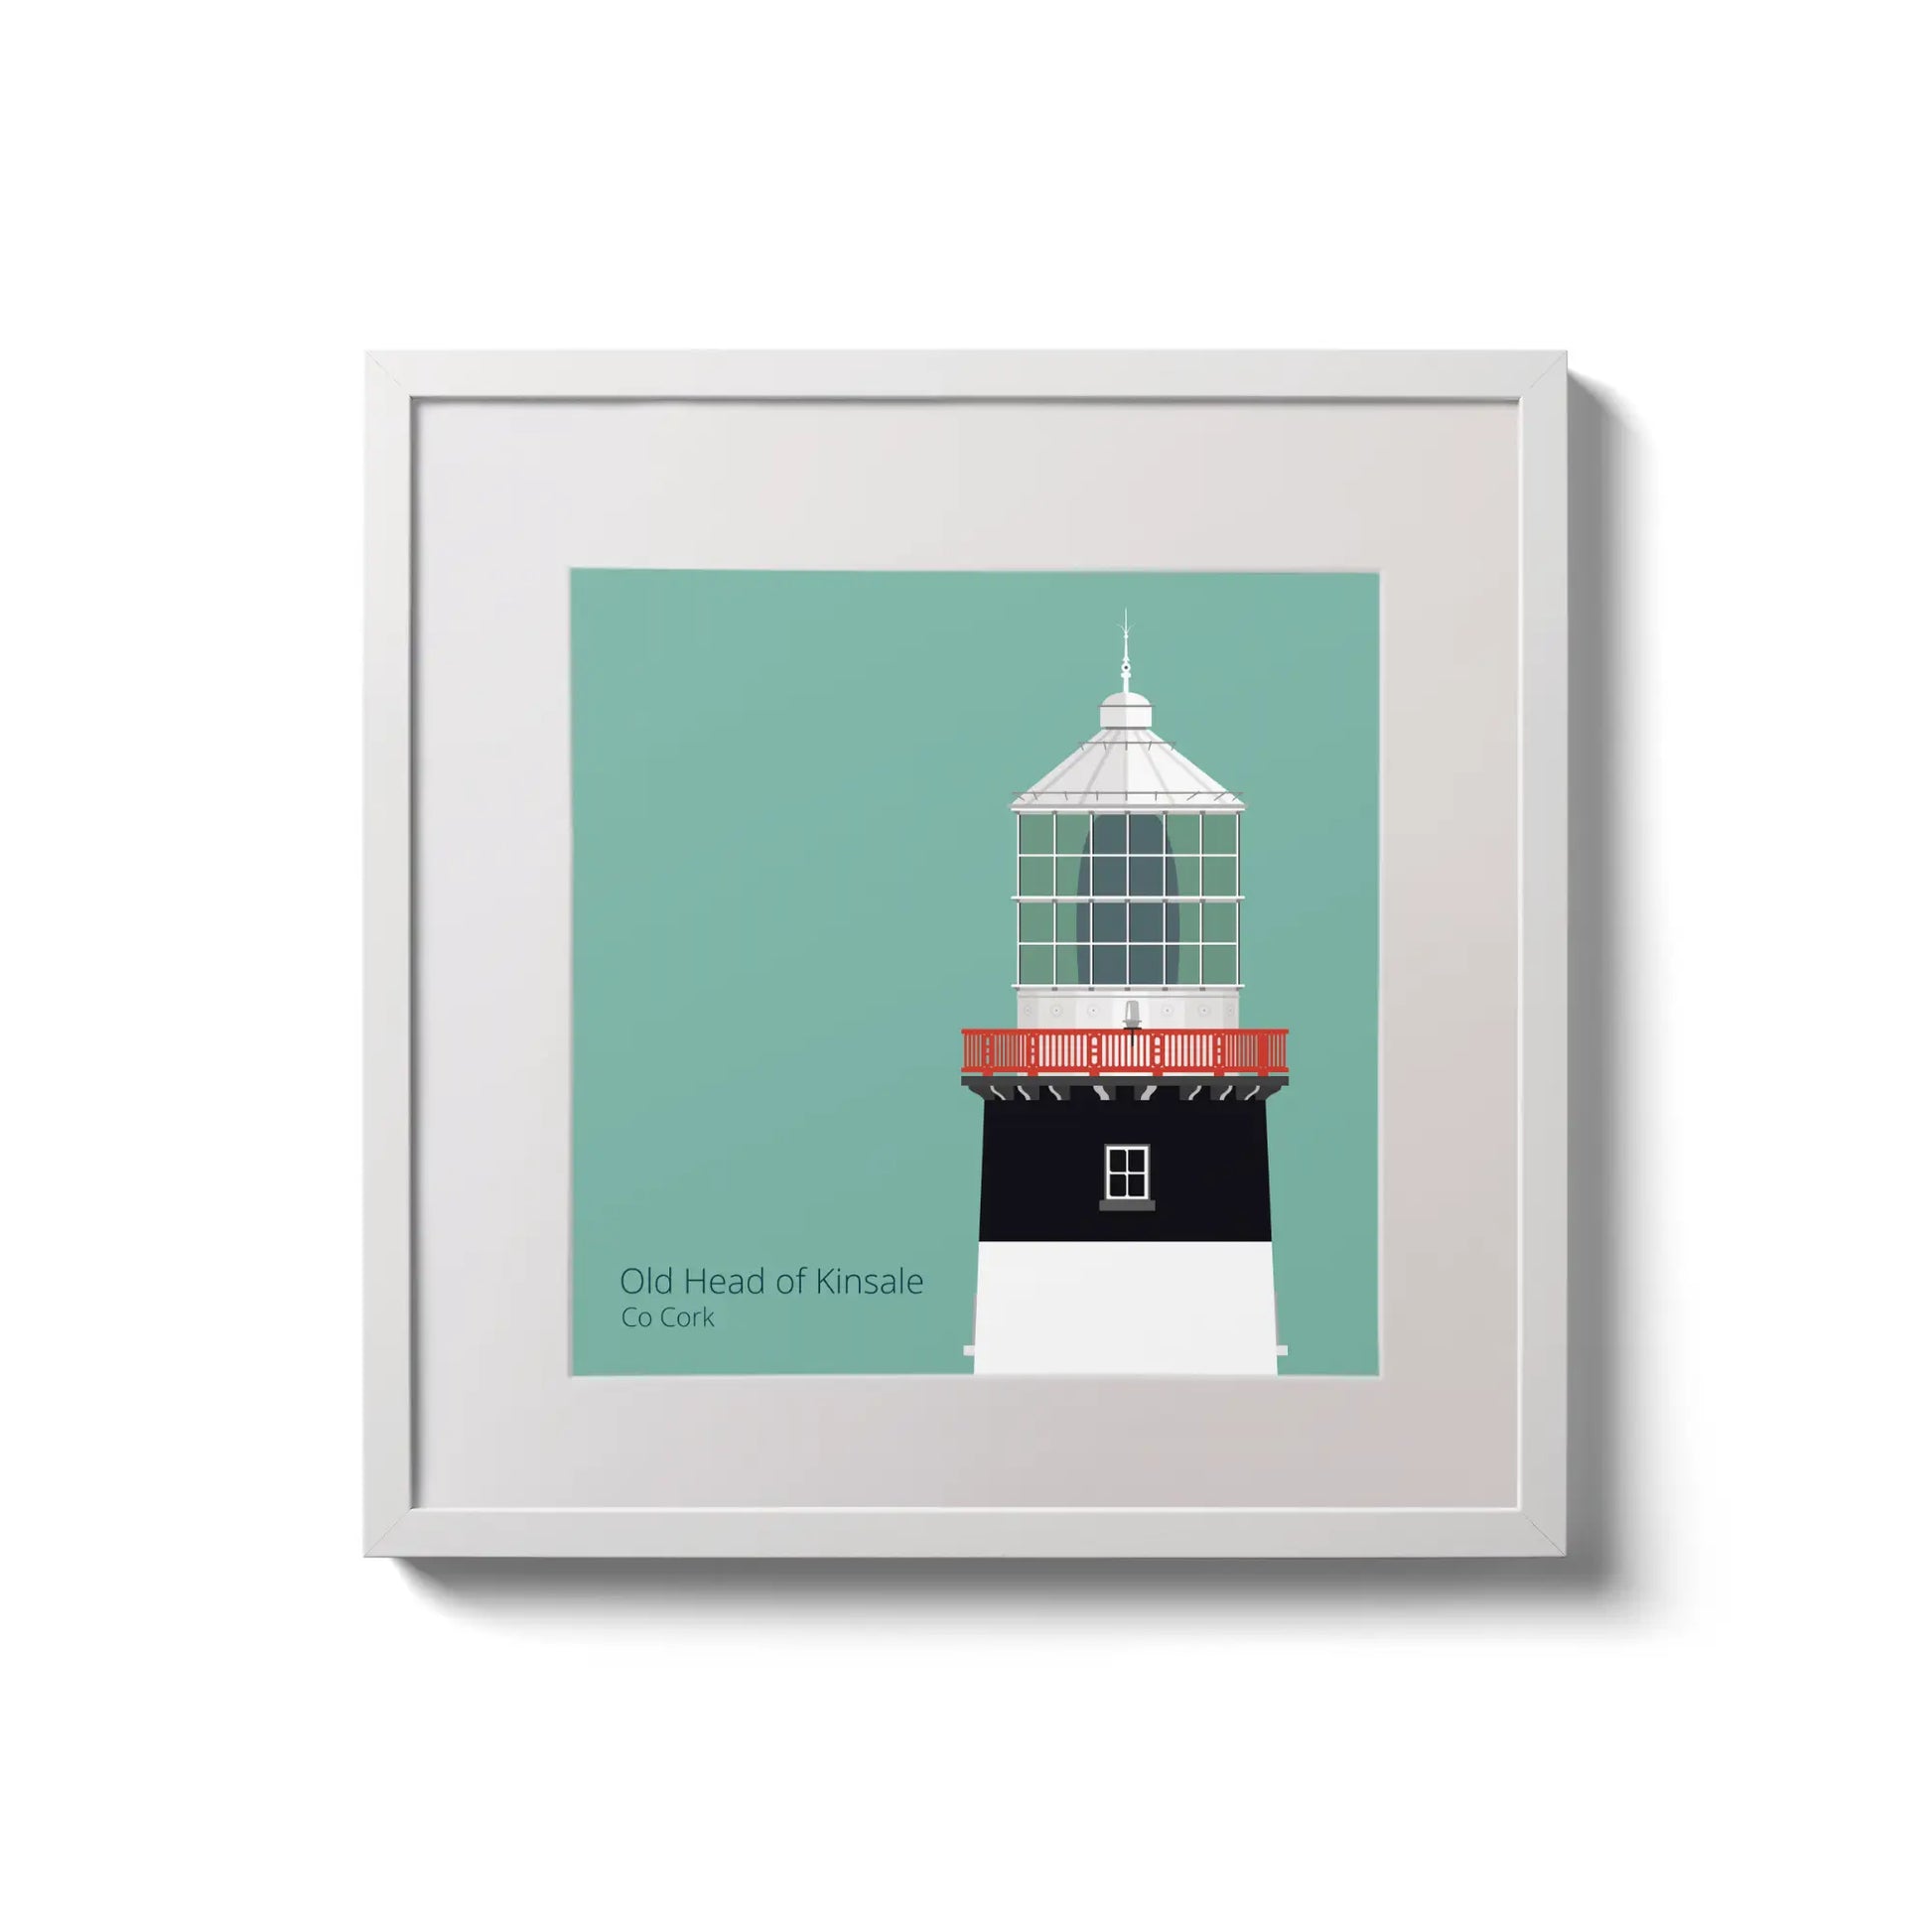 Illustration of Old Head of Kinsale lighthouse on an ocean green background,  in a white square frame measuring 20x20cm.